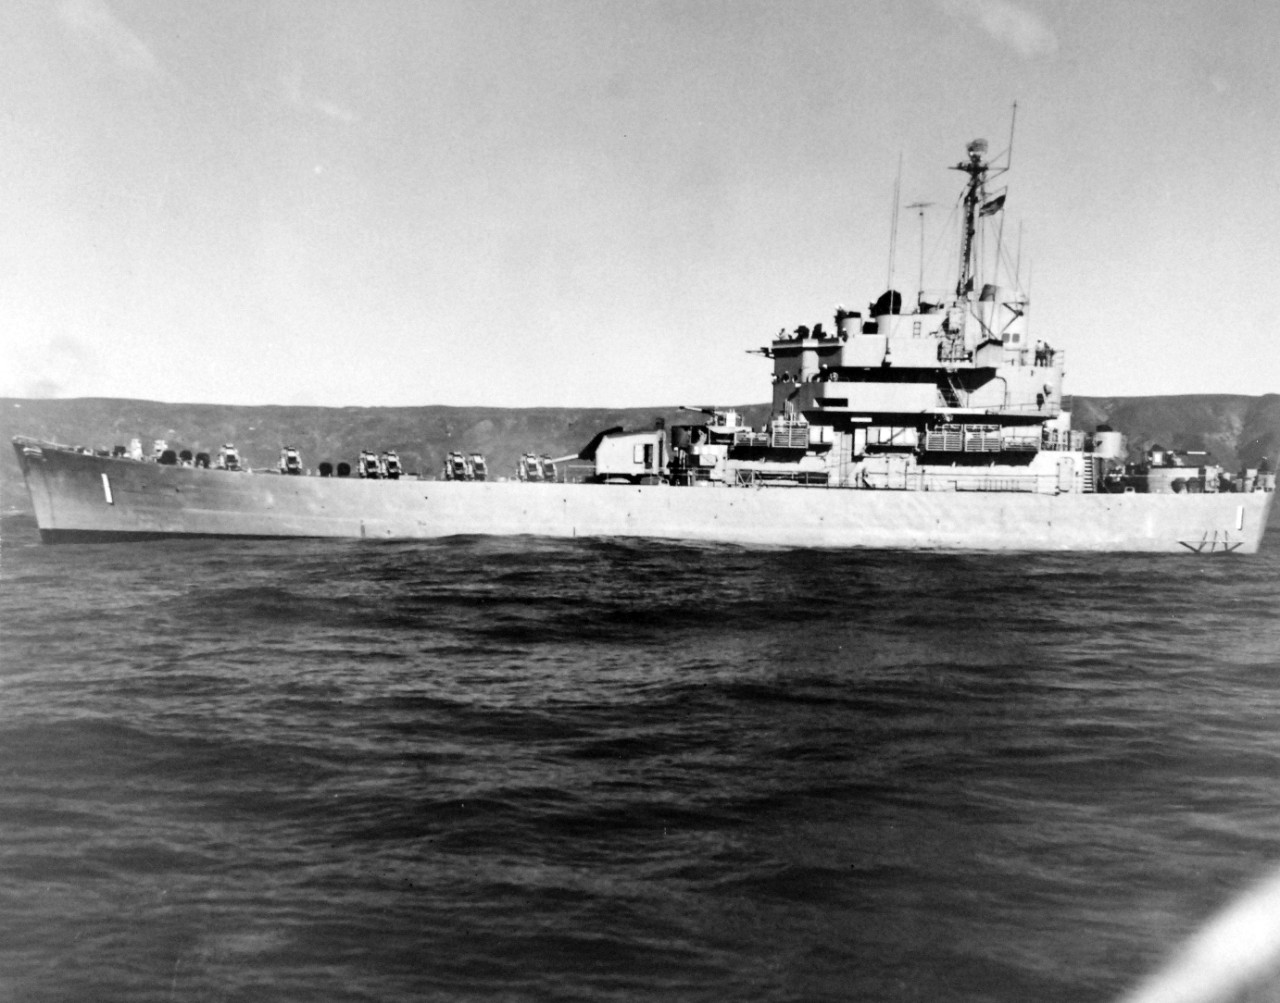 80-G-689756:  USS Carronade (IFS-1), 1955-59.  Carronade was an Inshore Fire Support Ship, built to provide gunfire support to amphibious landings or operations close to shore. Official U.S. Navy Photograph, now in the collections of the National Archives.  (2017/11/01).  Photograph is extremely curved.  